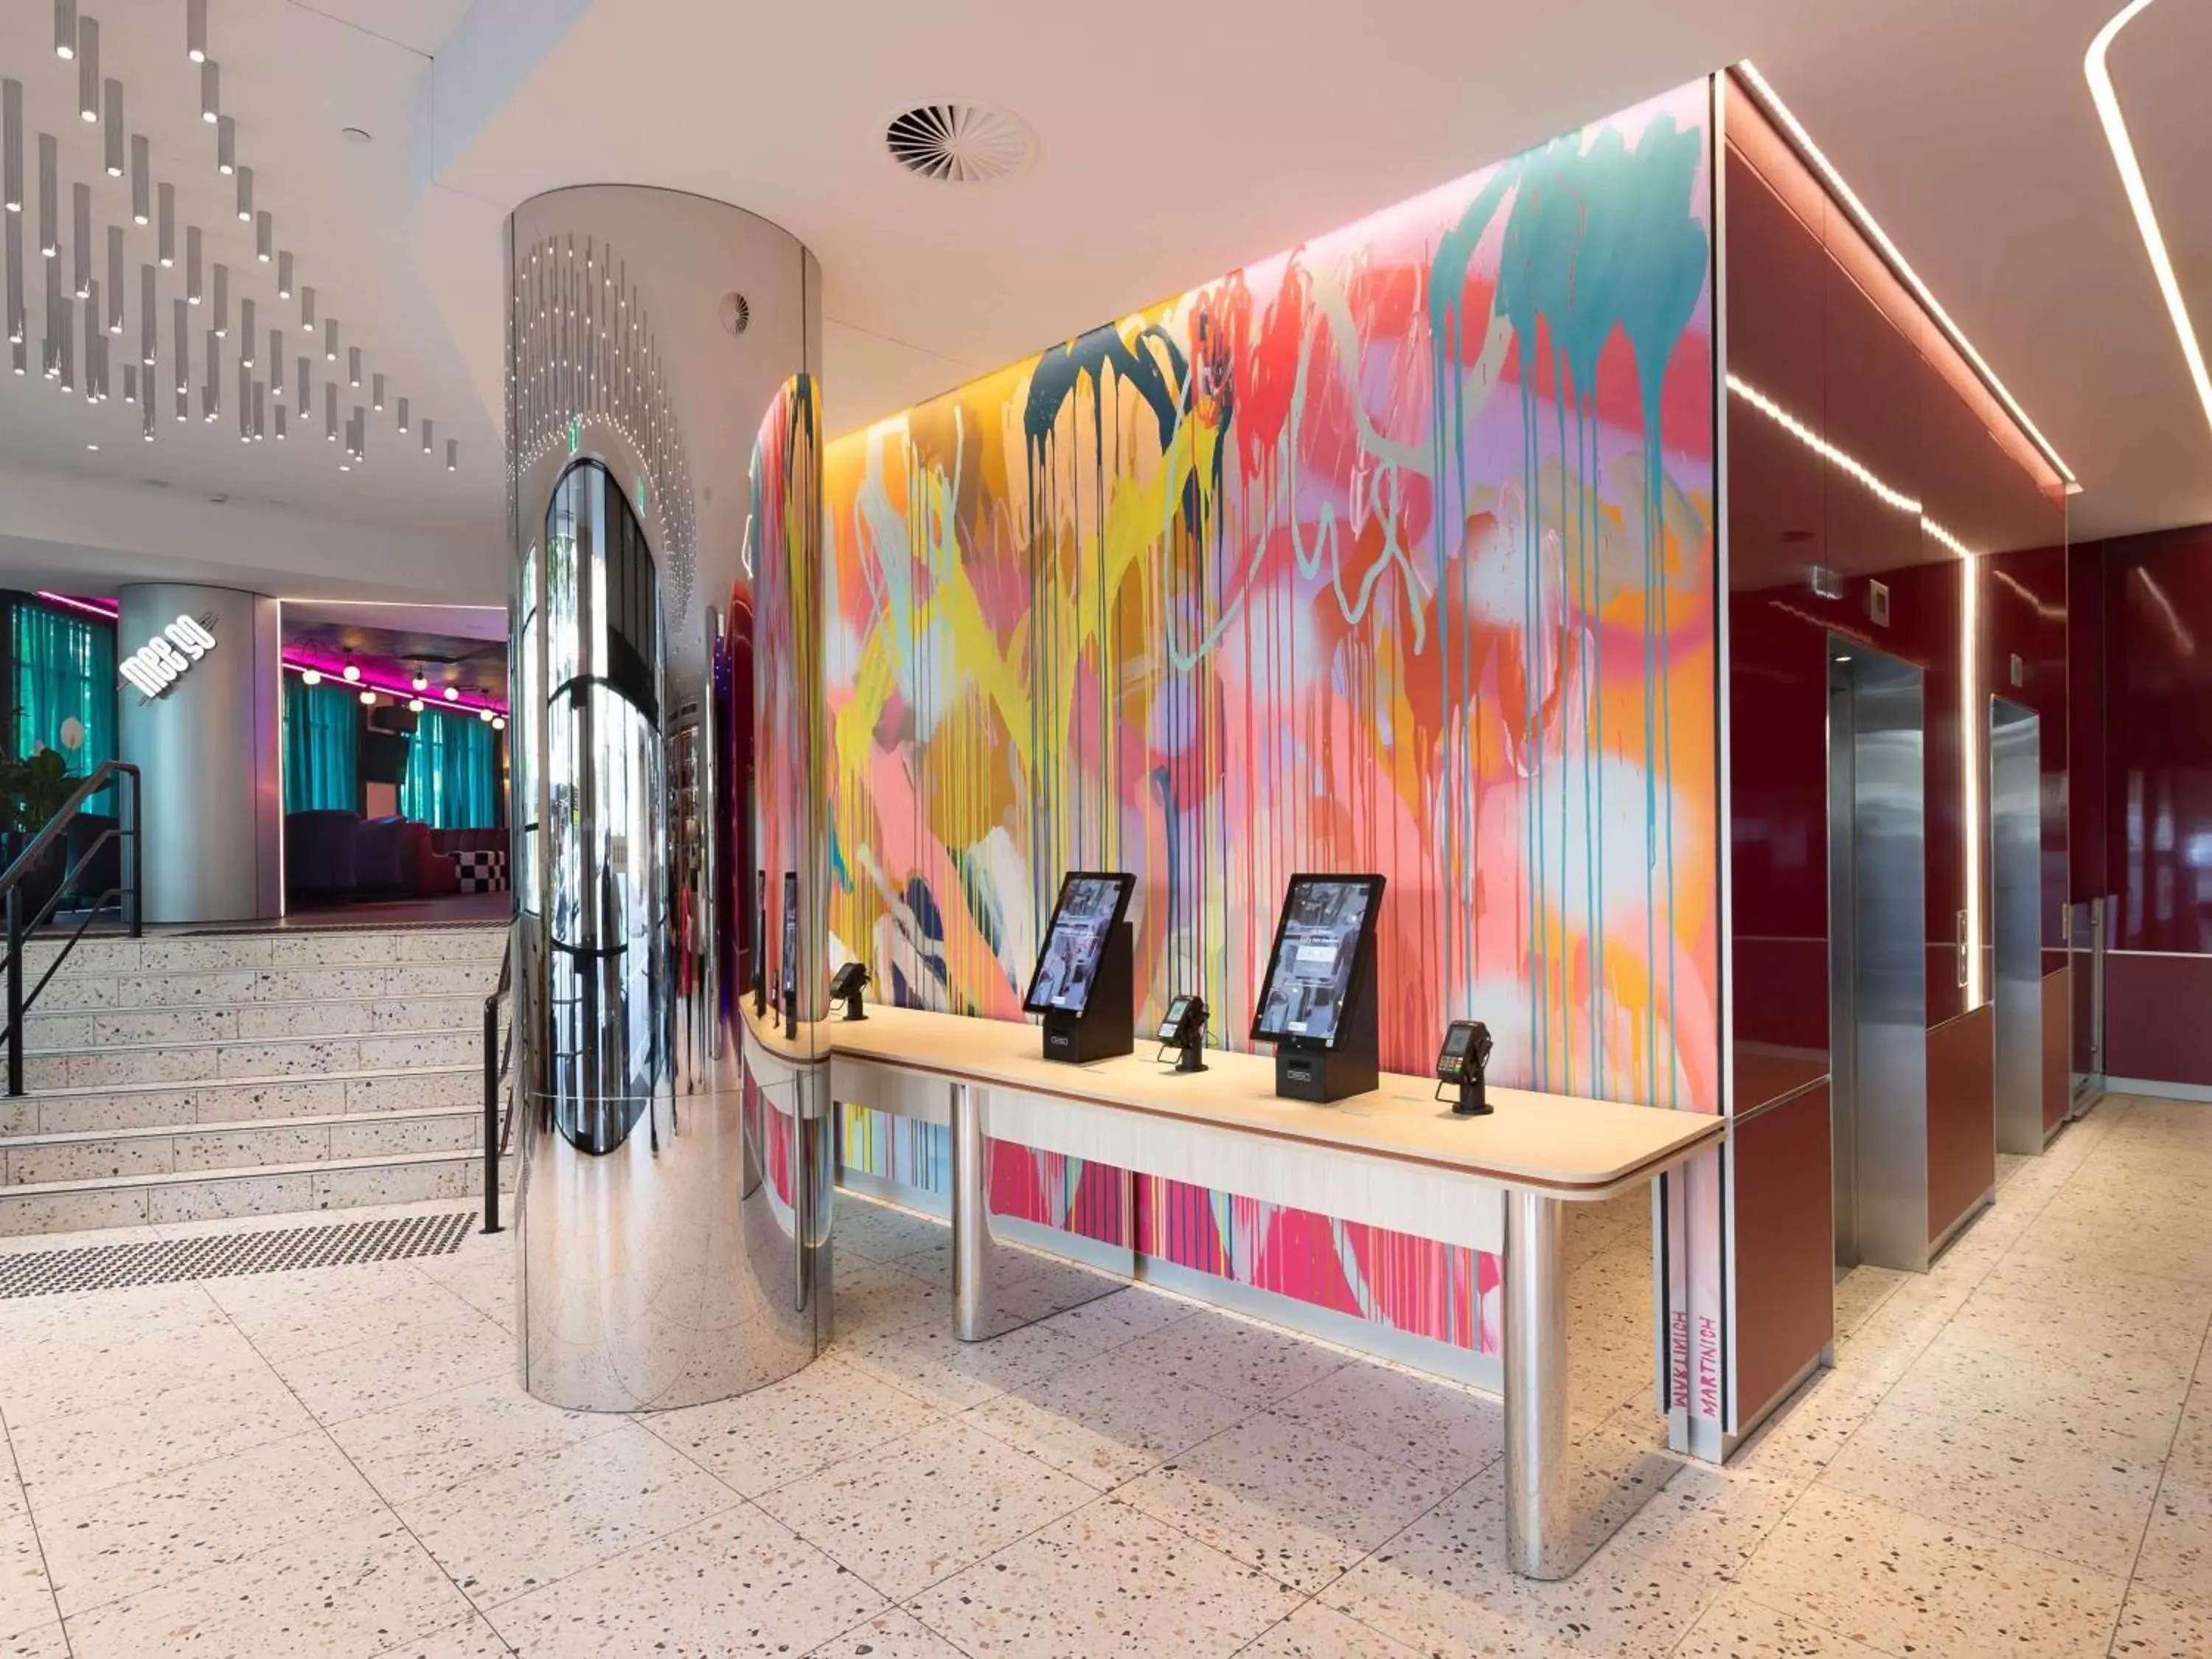 Property building in ibis Styles Sydney Central